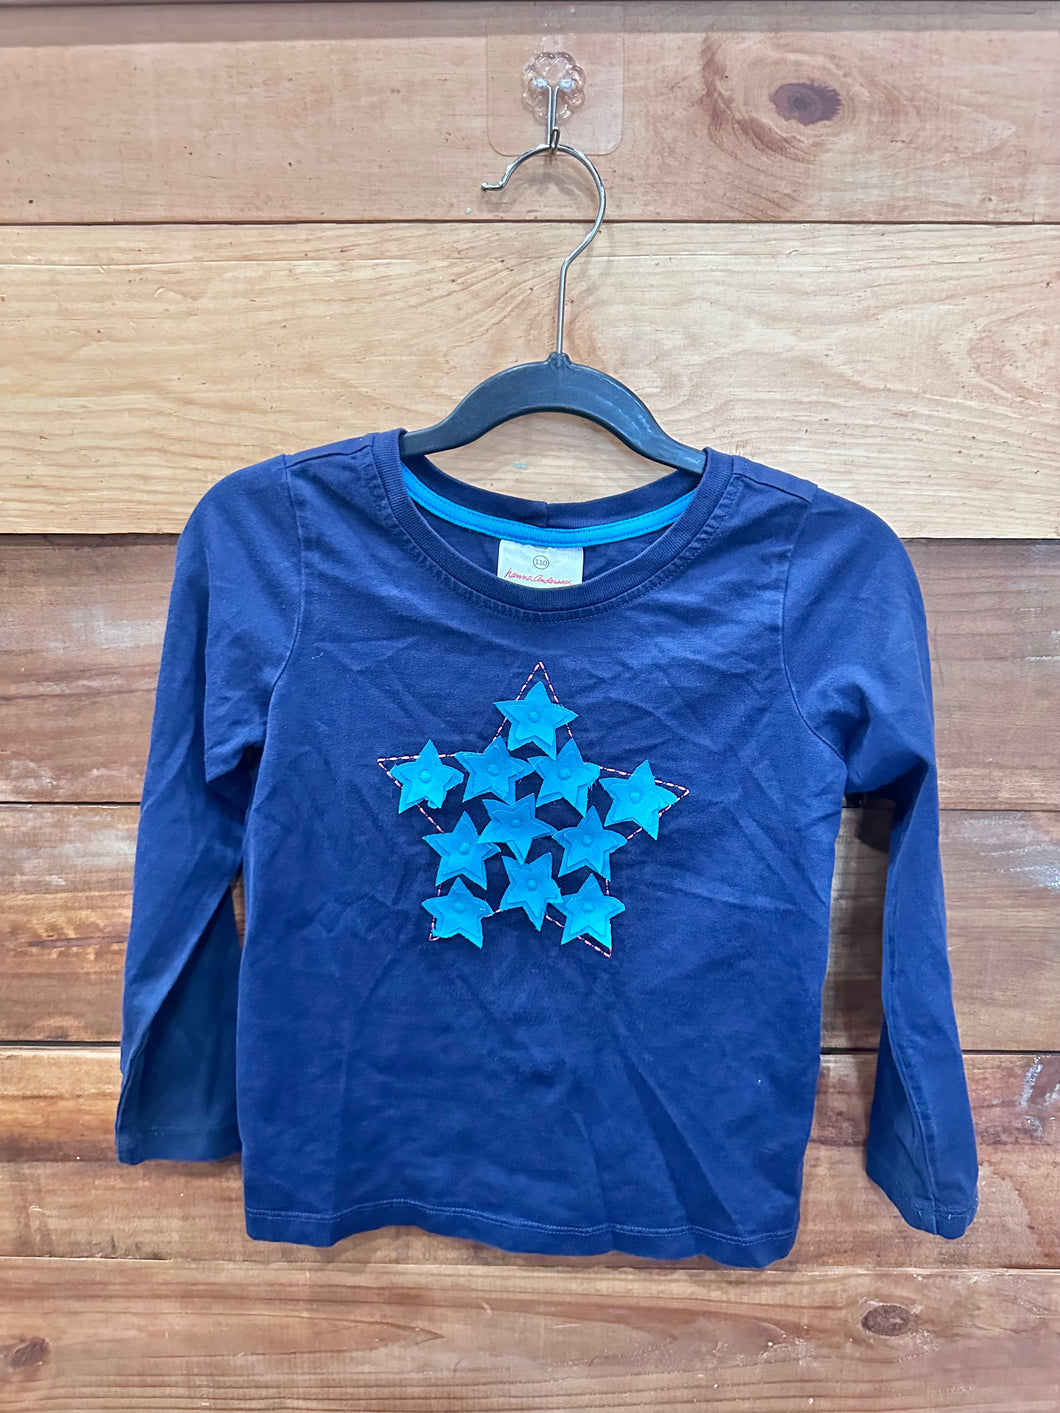 Hanna Andersson Blue Star Shirt Size 5